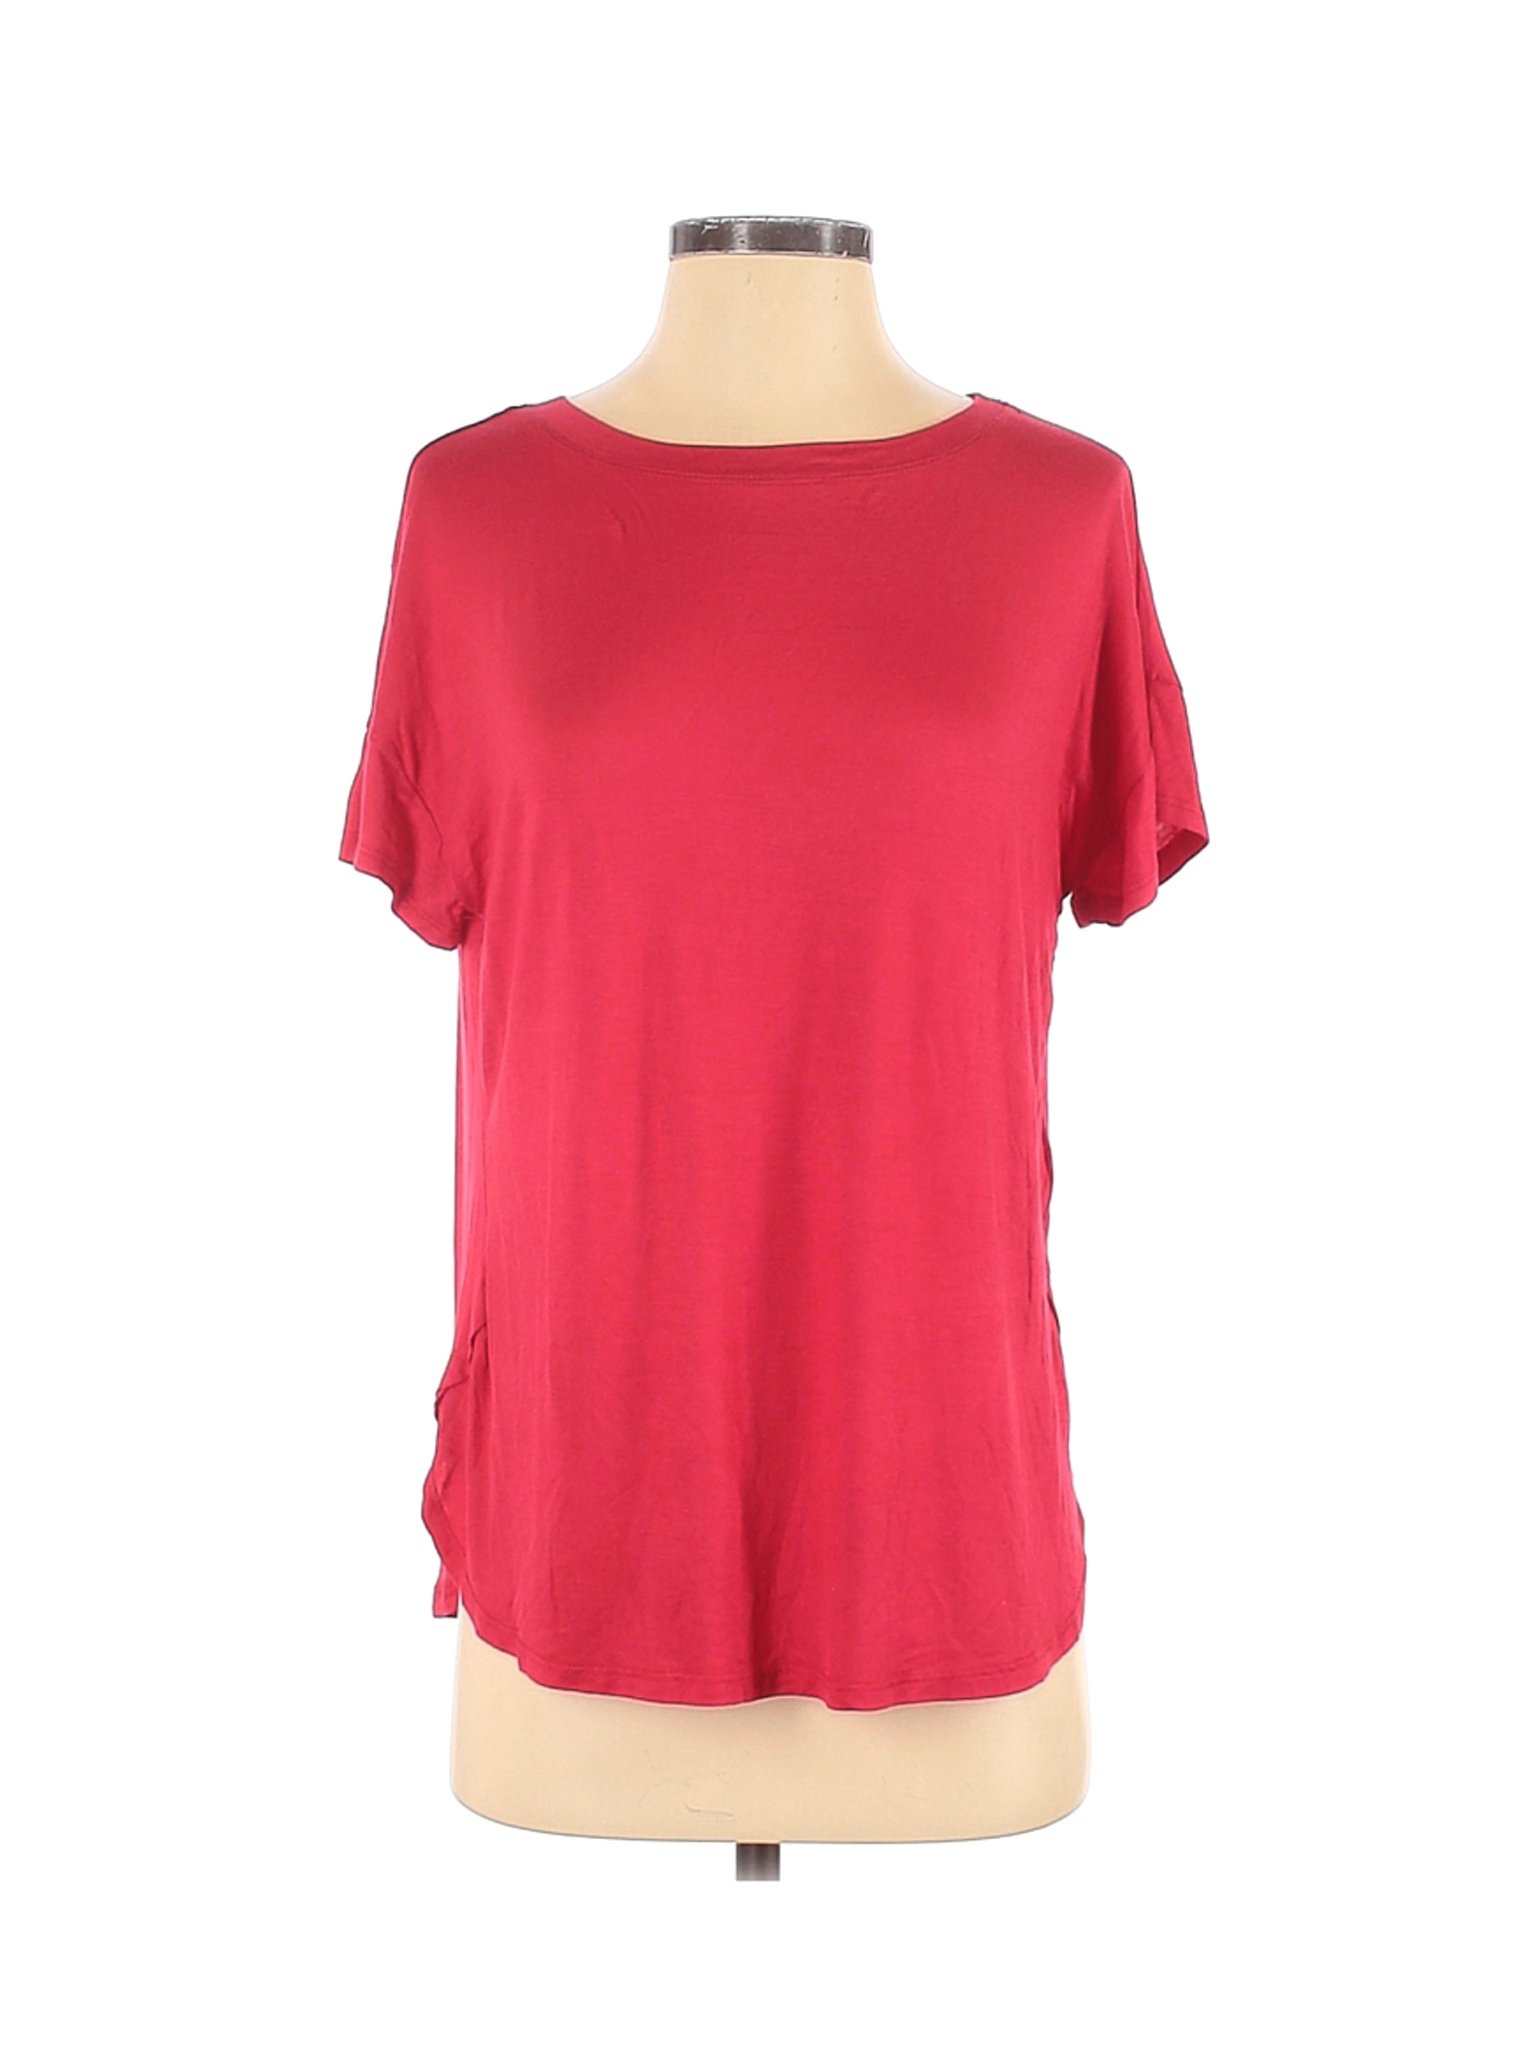 NWT H by Bordeaux Women Red Short Sleeve Top S | eBay